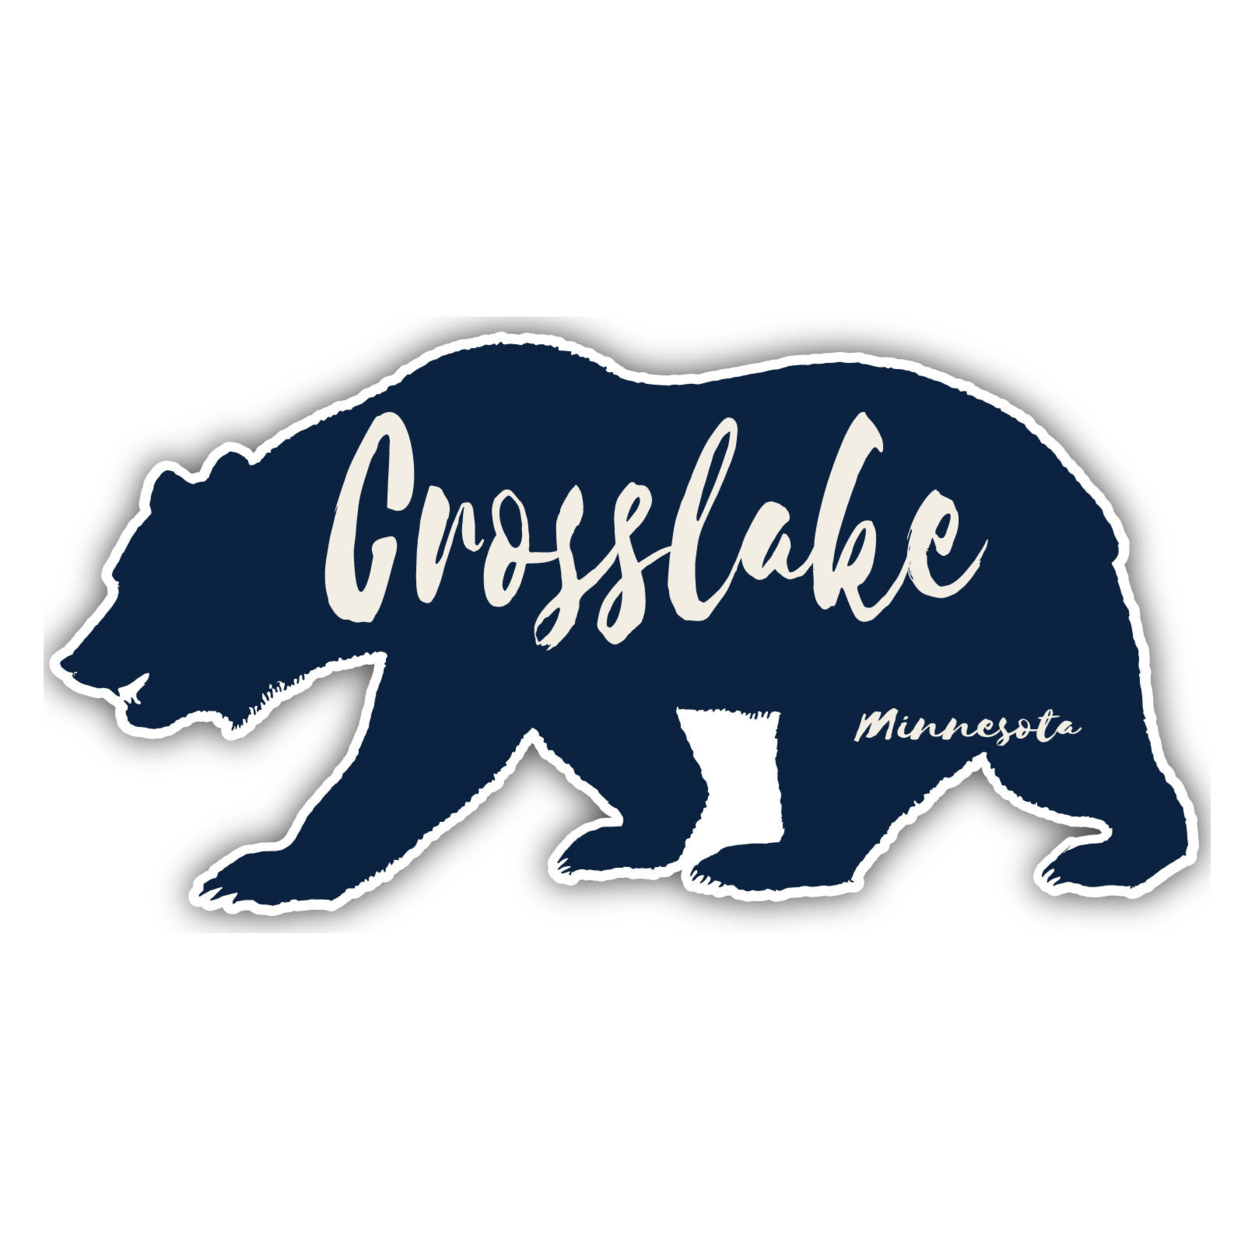 Crosslake Minnesota Souvenir Decorative Stickers (Choose Theme And Size) - Single Unit, 6-Inch, Great Outdoors